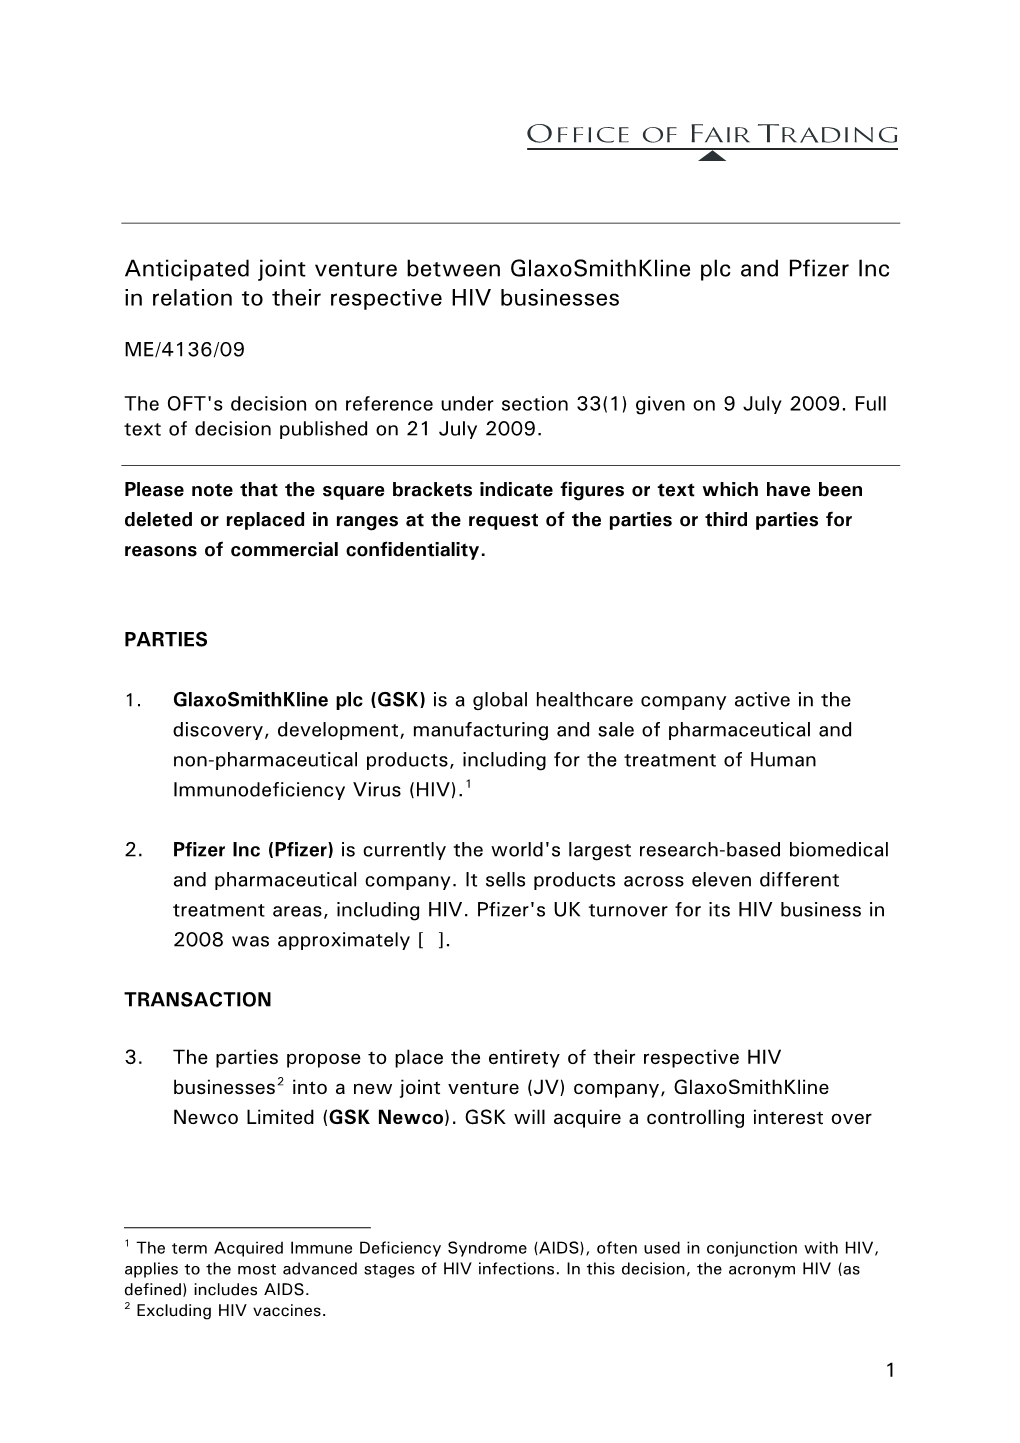 Anticipated Joint Venture Between Glaxosmithkline Plc and Pfizer Inc in Relation to Their Respective HIV Businesses